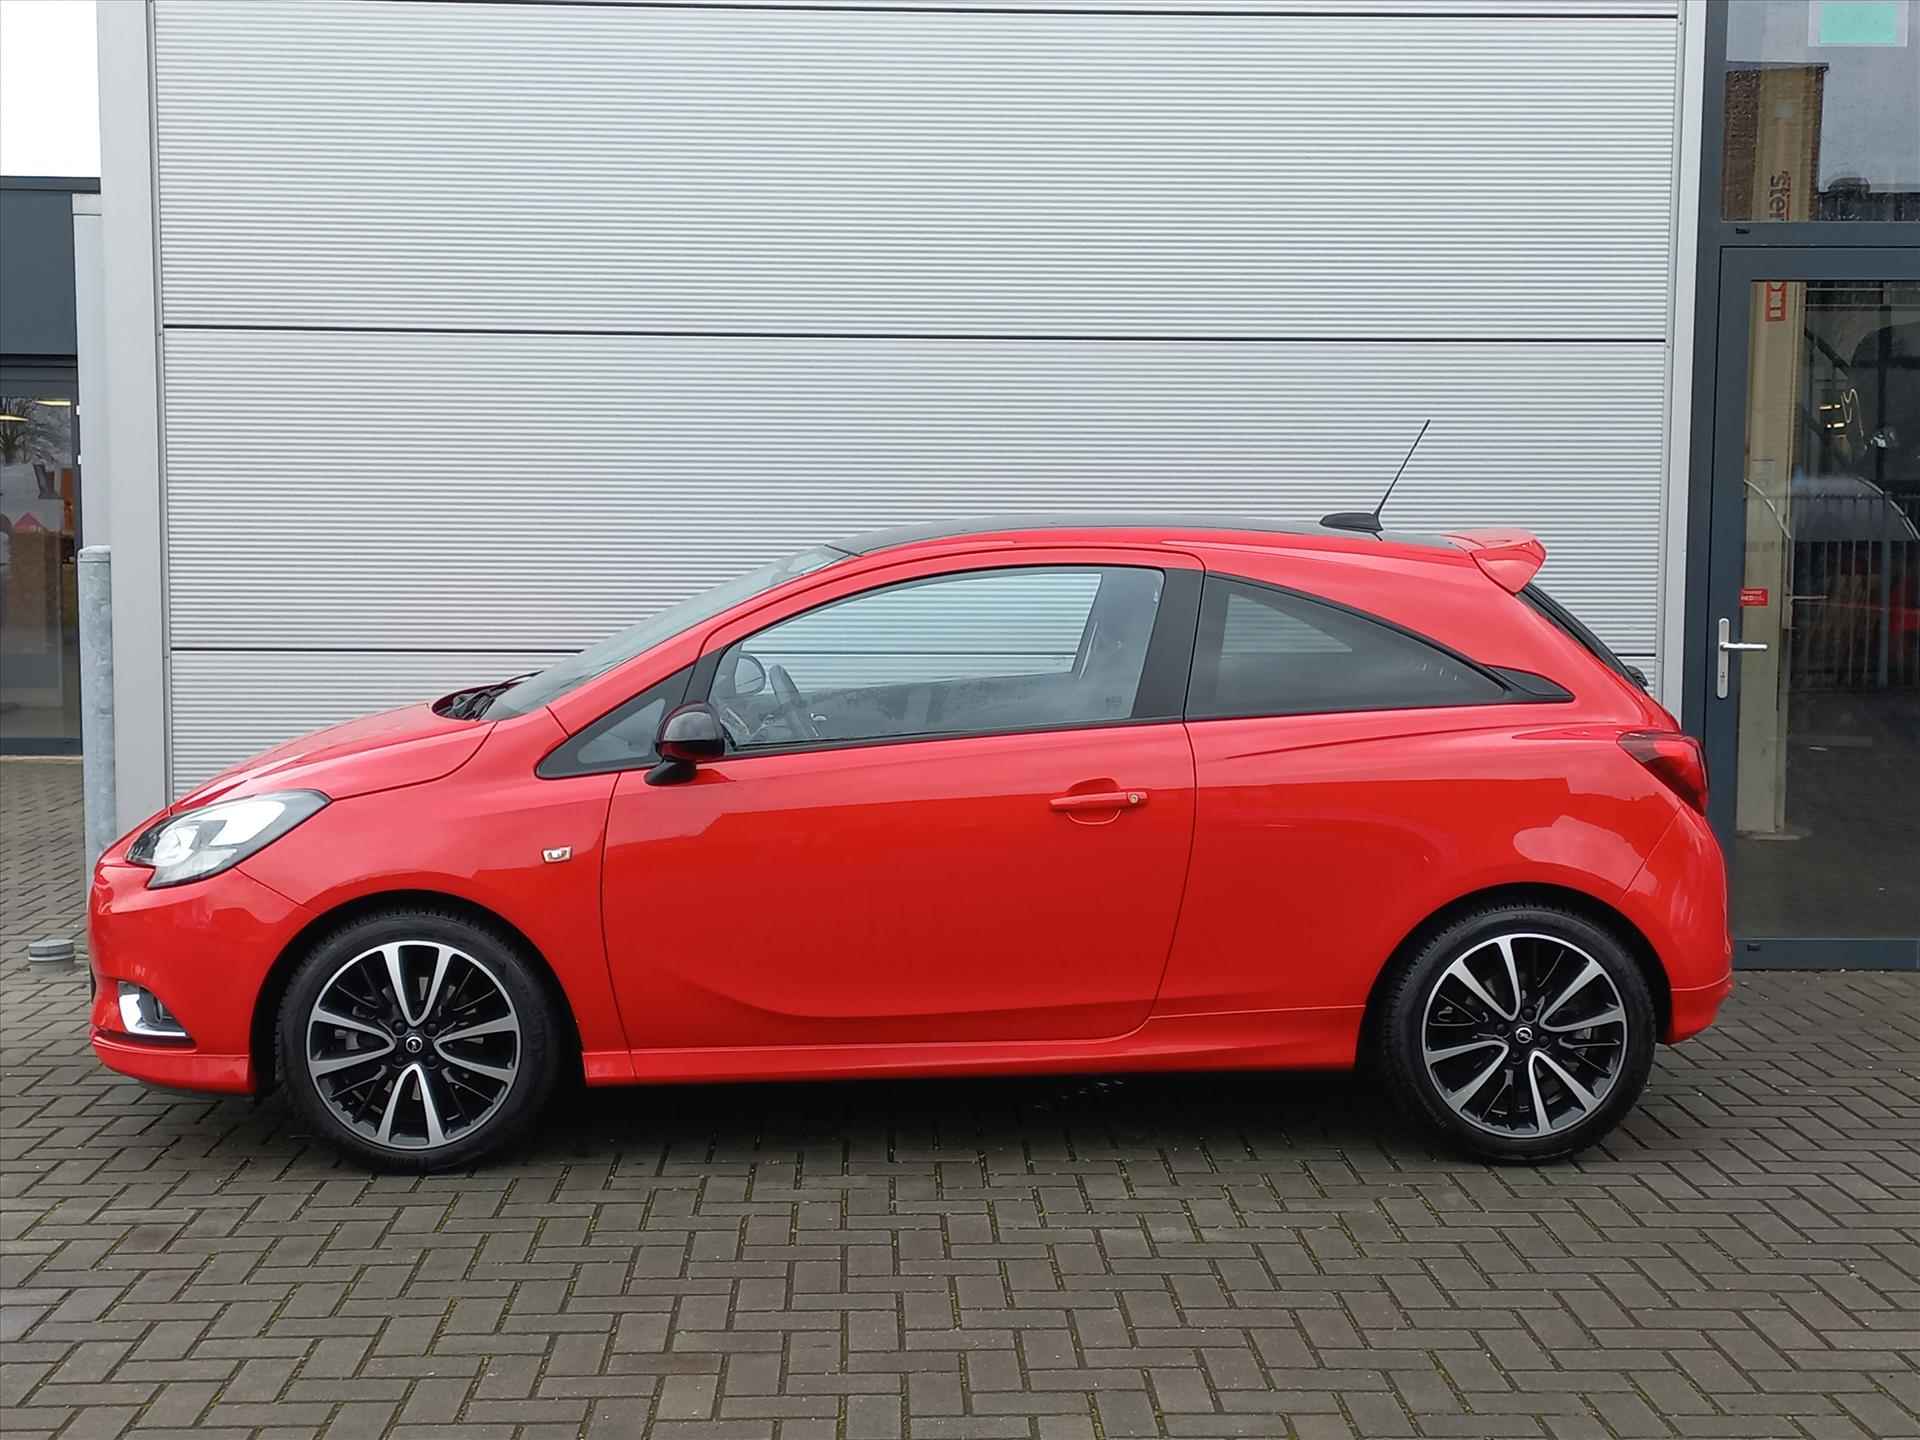 Opel Corsa 1.0T 90pk OPC-LINE | Airco | 17" Lm velgen | navigatie by Apple of Android | Winterpack | Spoilers - 3/40